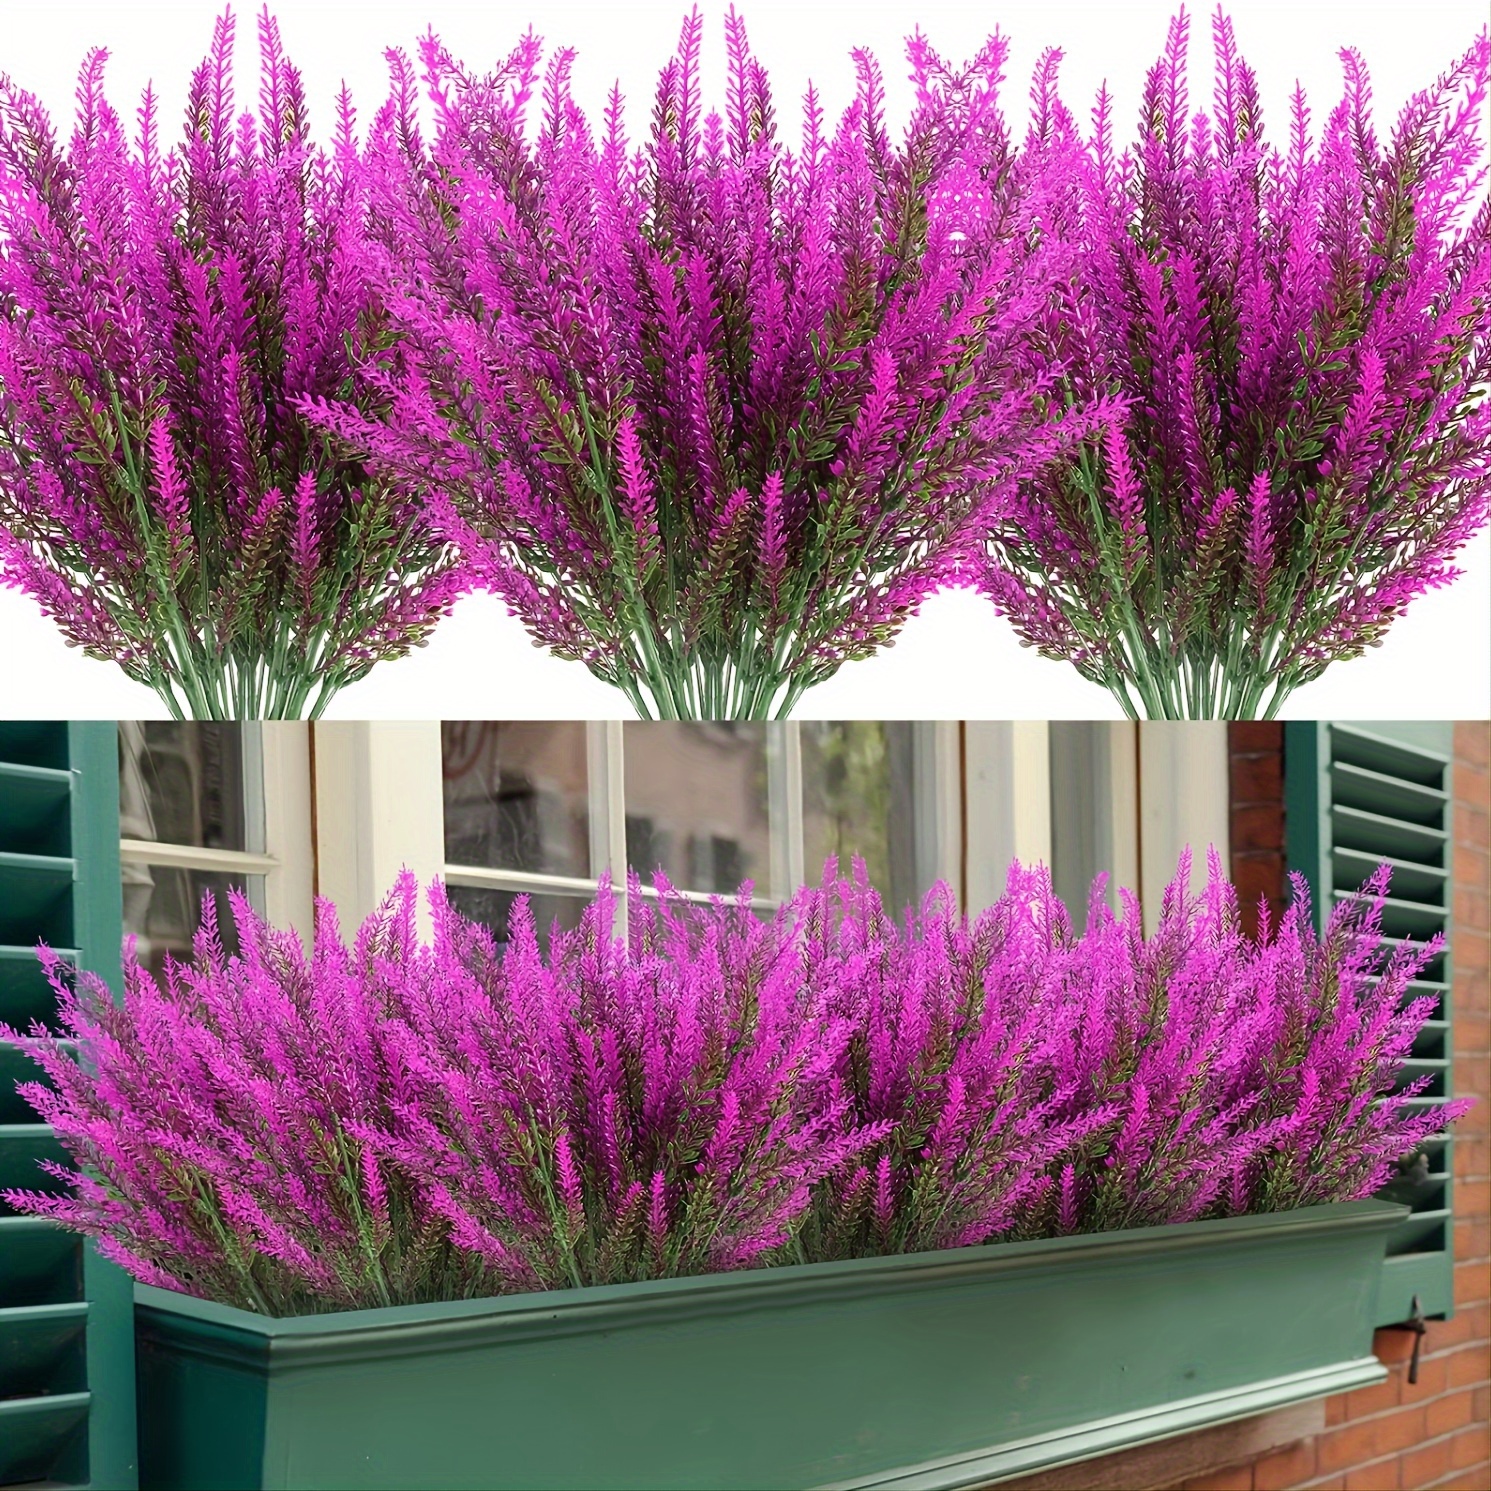 

6 Bundles Of Uv-resistant Artificial Lavender Flowers - Perfect For Garden, Porch, And Window Box Decorations